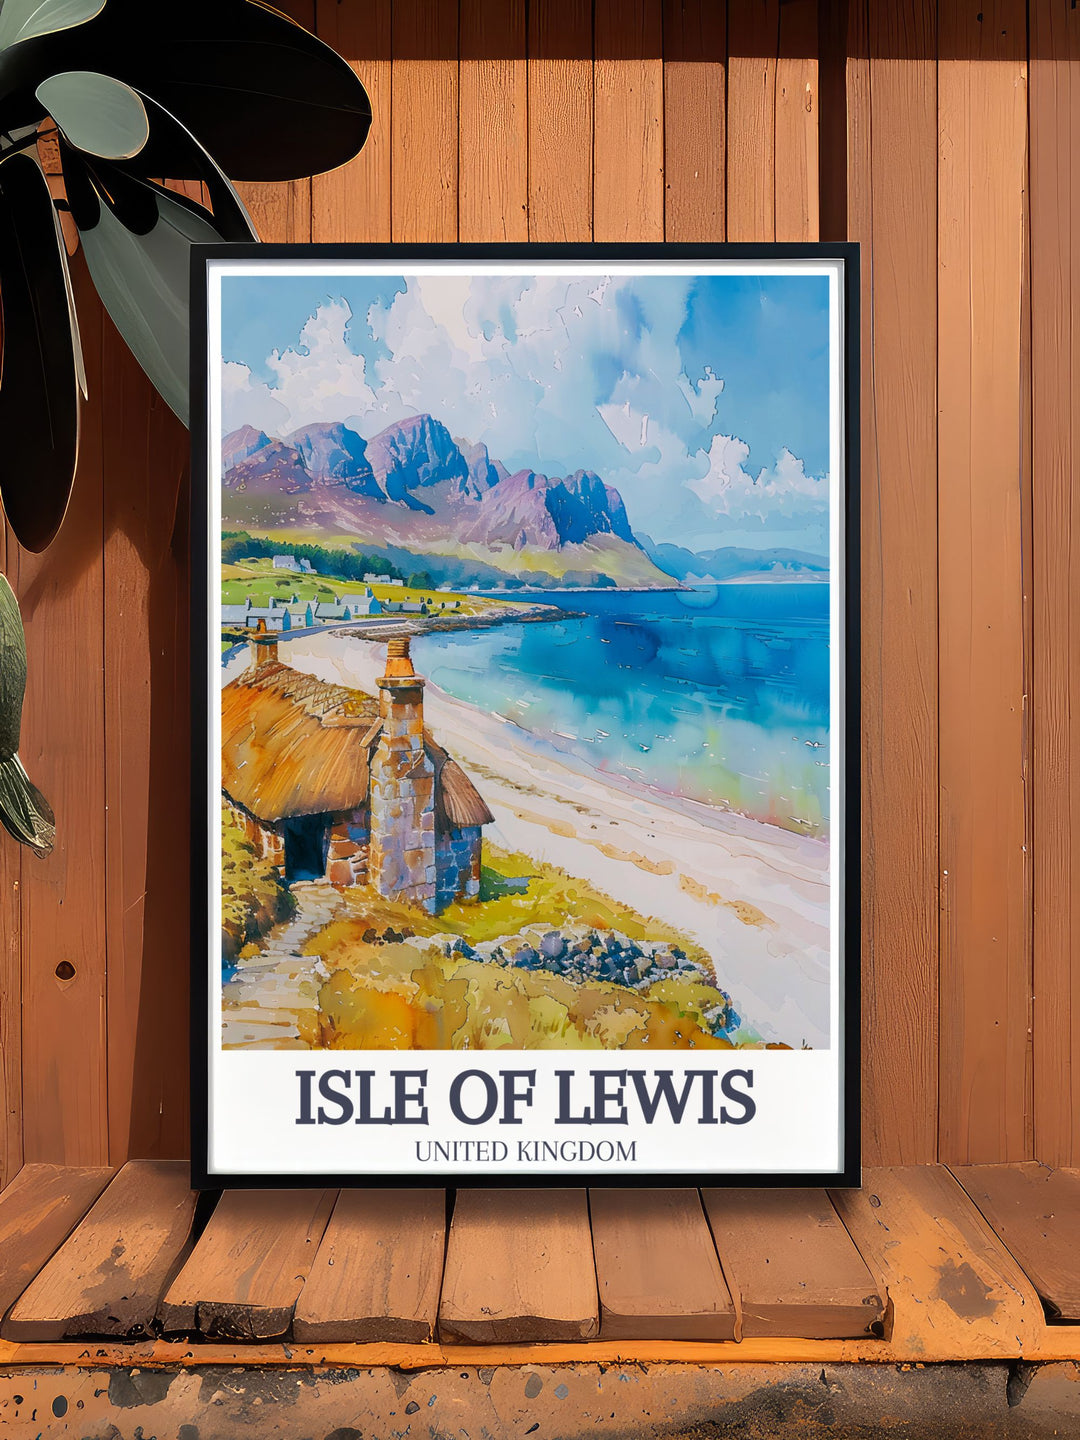 Framed art highlighting the historical and cultural significance of Gearrannan Blackhouse Village, perfect for history enthusiasts and admirers of traditional Scottish architecture, bringing a piece of Scotlands heritage into your space.